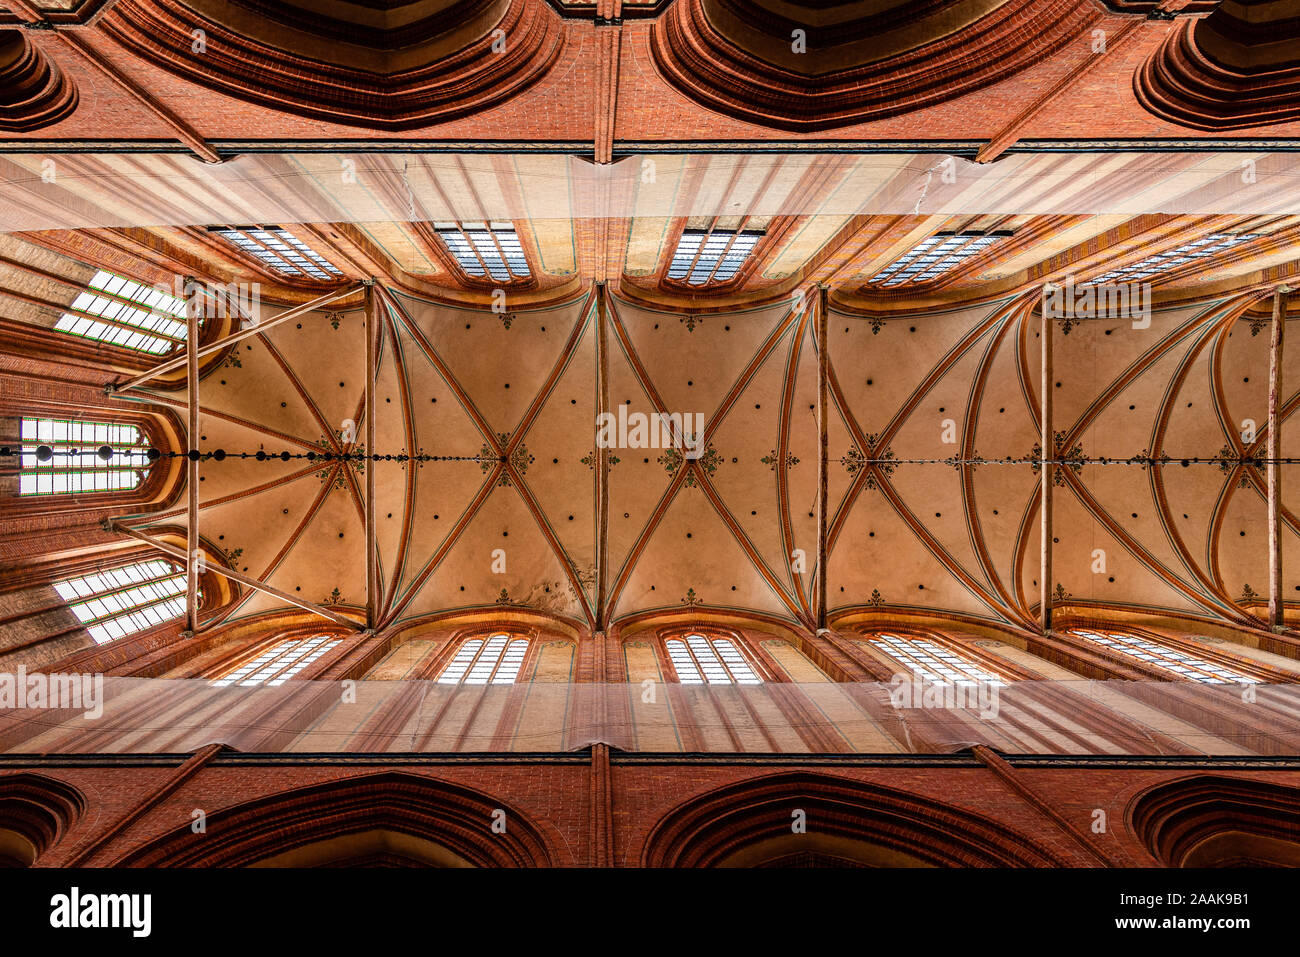 Wismar, Germany - August 2, 2019: Church of St. Nicholas. Interior view directly below the vaults of the main nave Stock Photo